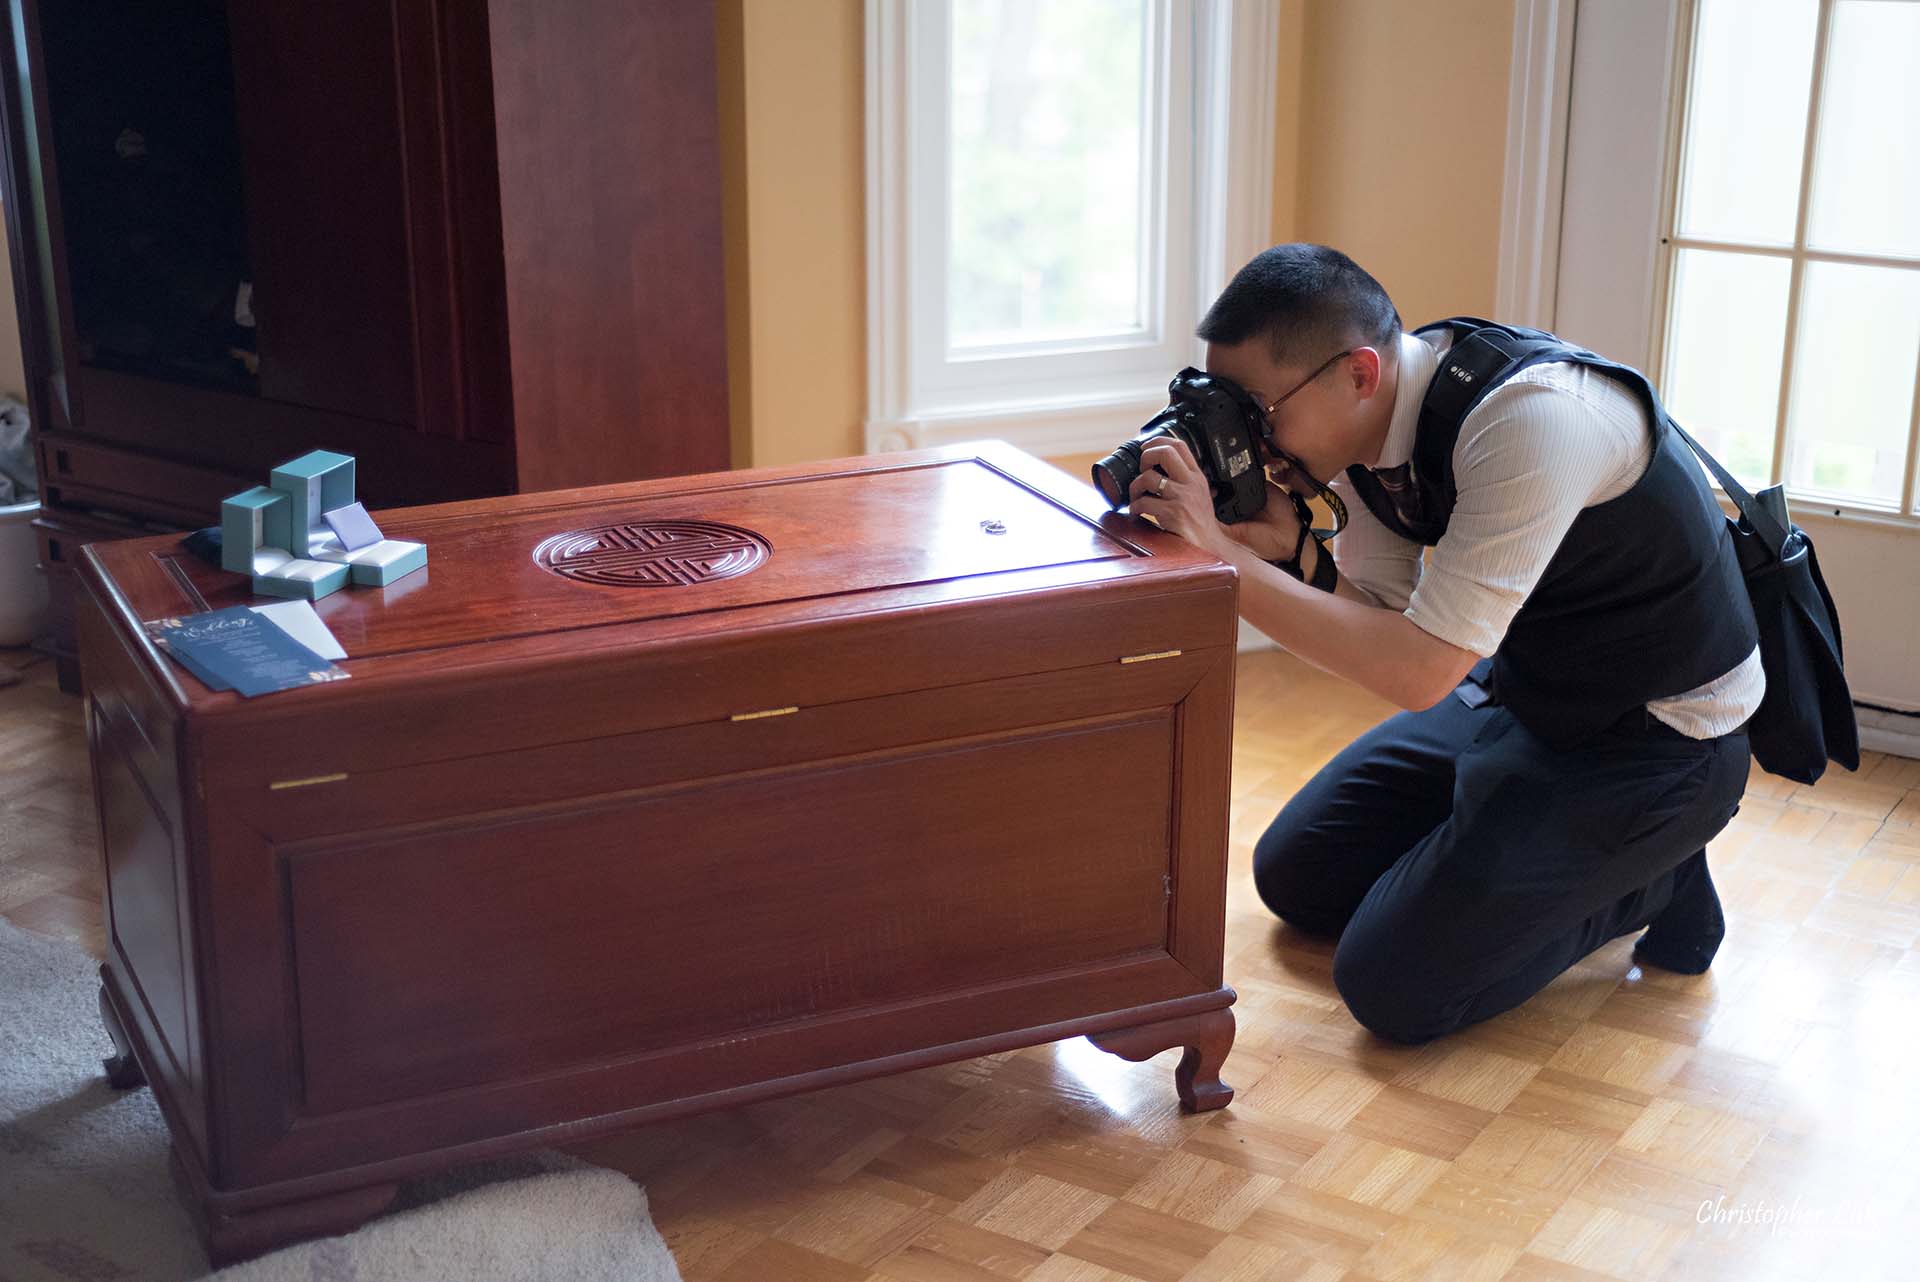 Christopher Luk Toronto Wedding Photographer Behind the Scenes Bride Getting Ready Home Wooden Chest Rings Bands Macro Lens Details 